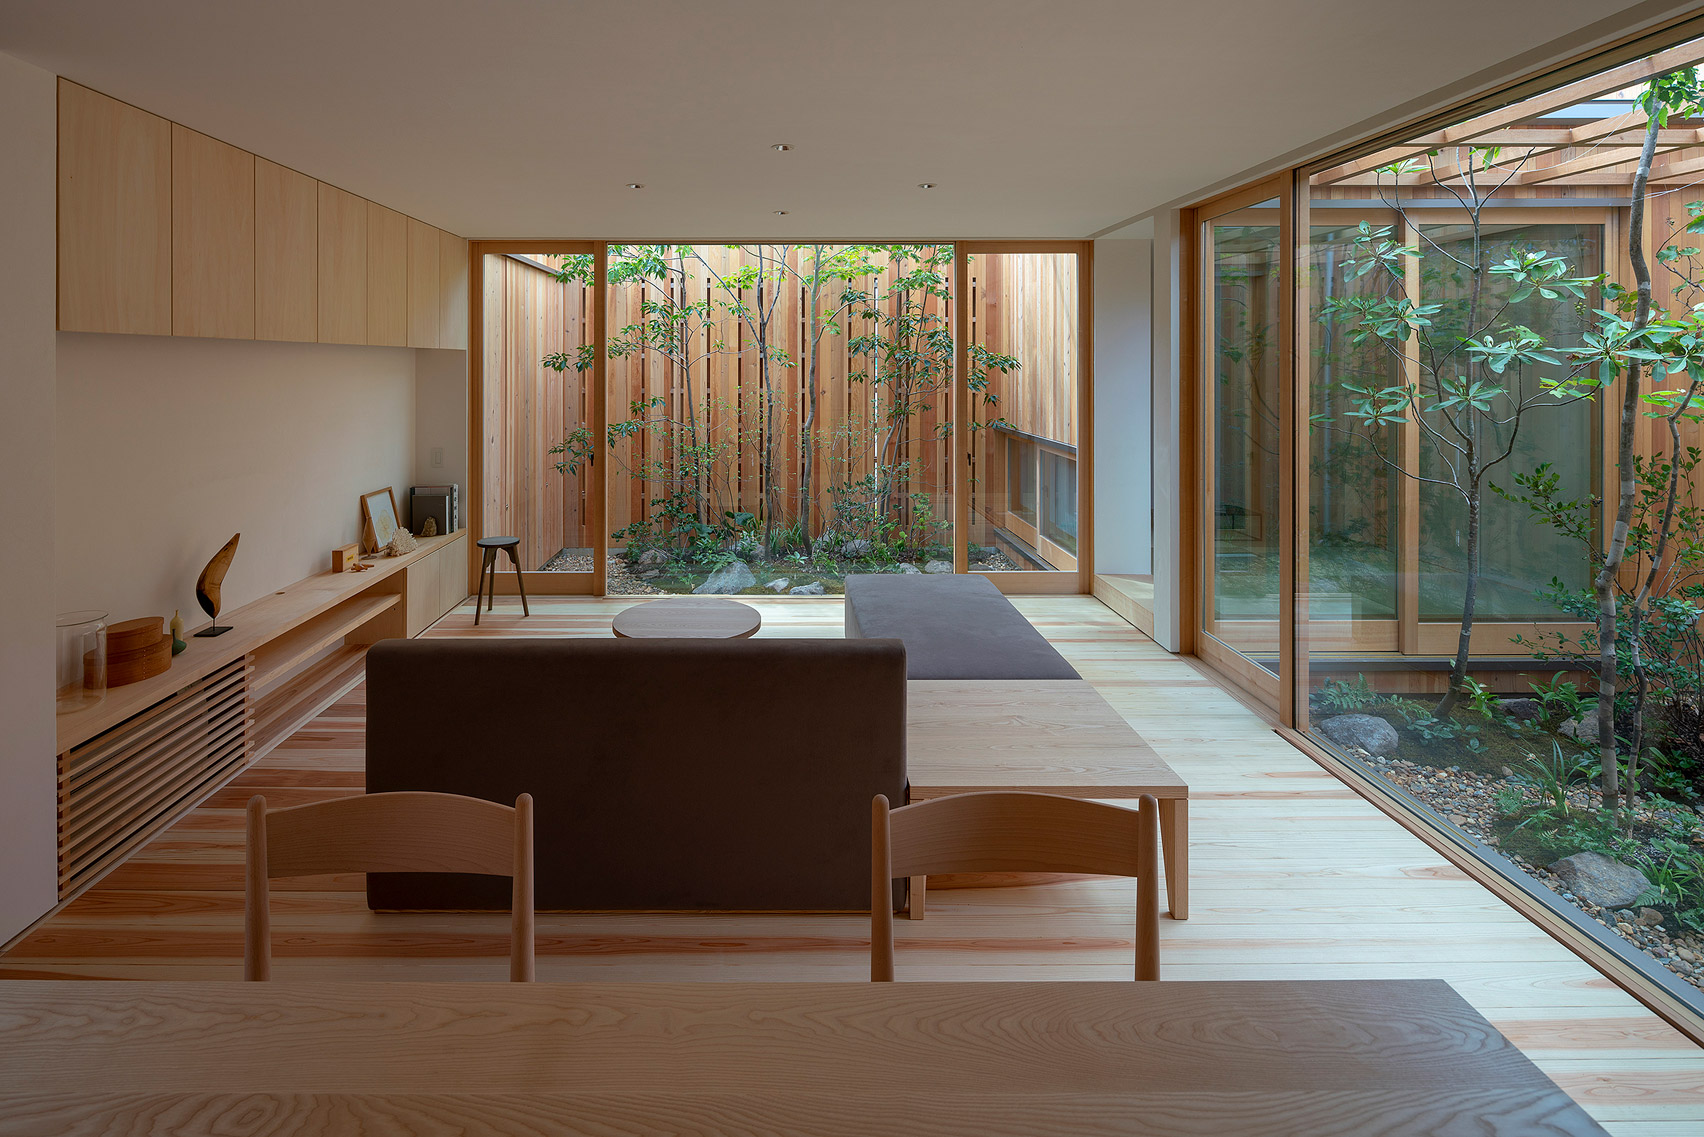 House in Akashi by Arbol